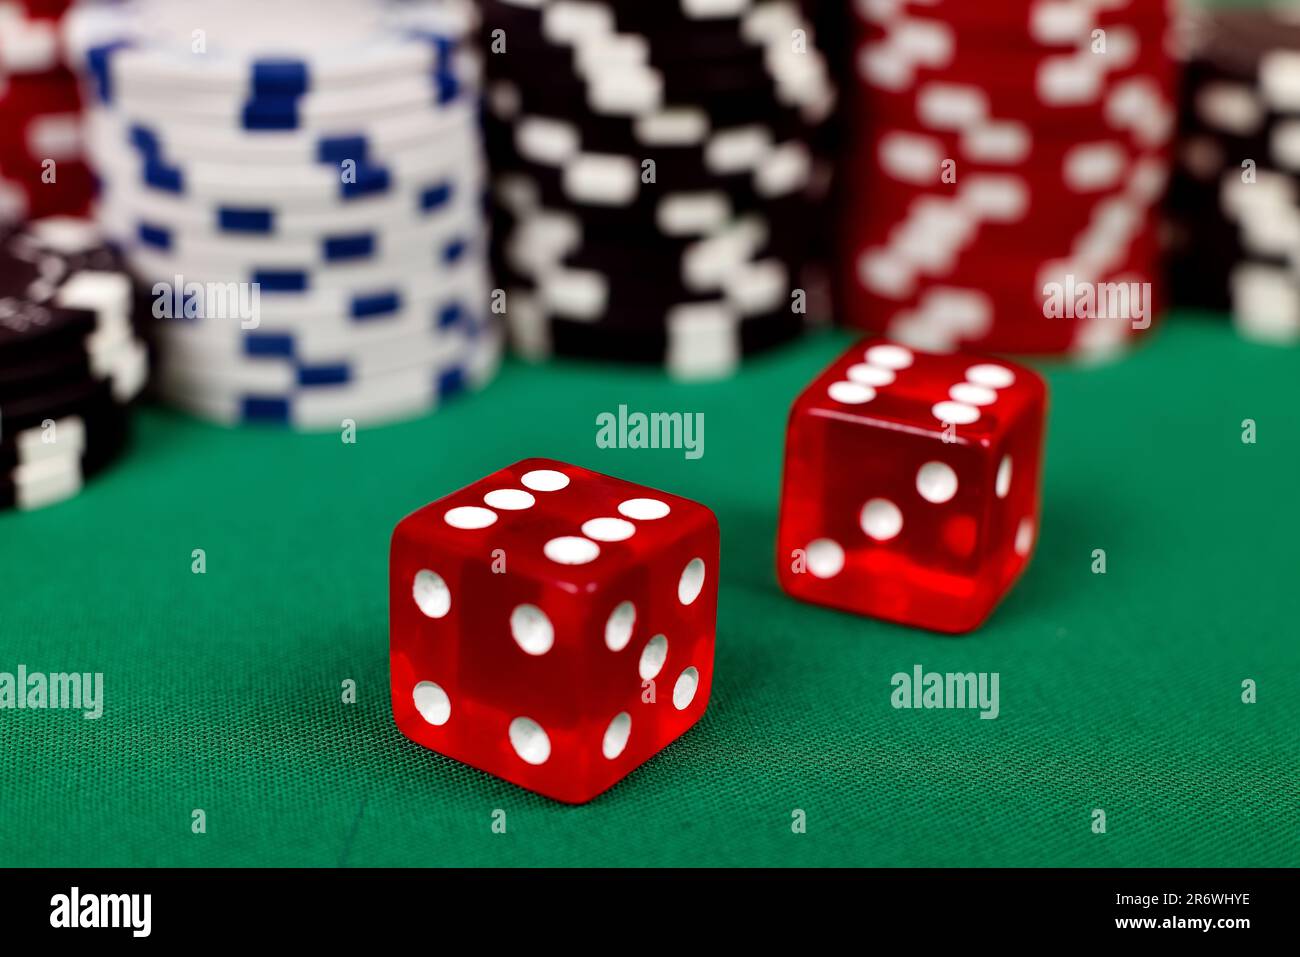 two red dice on green table, close up Stock Photo